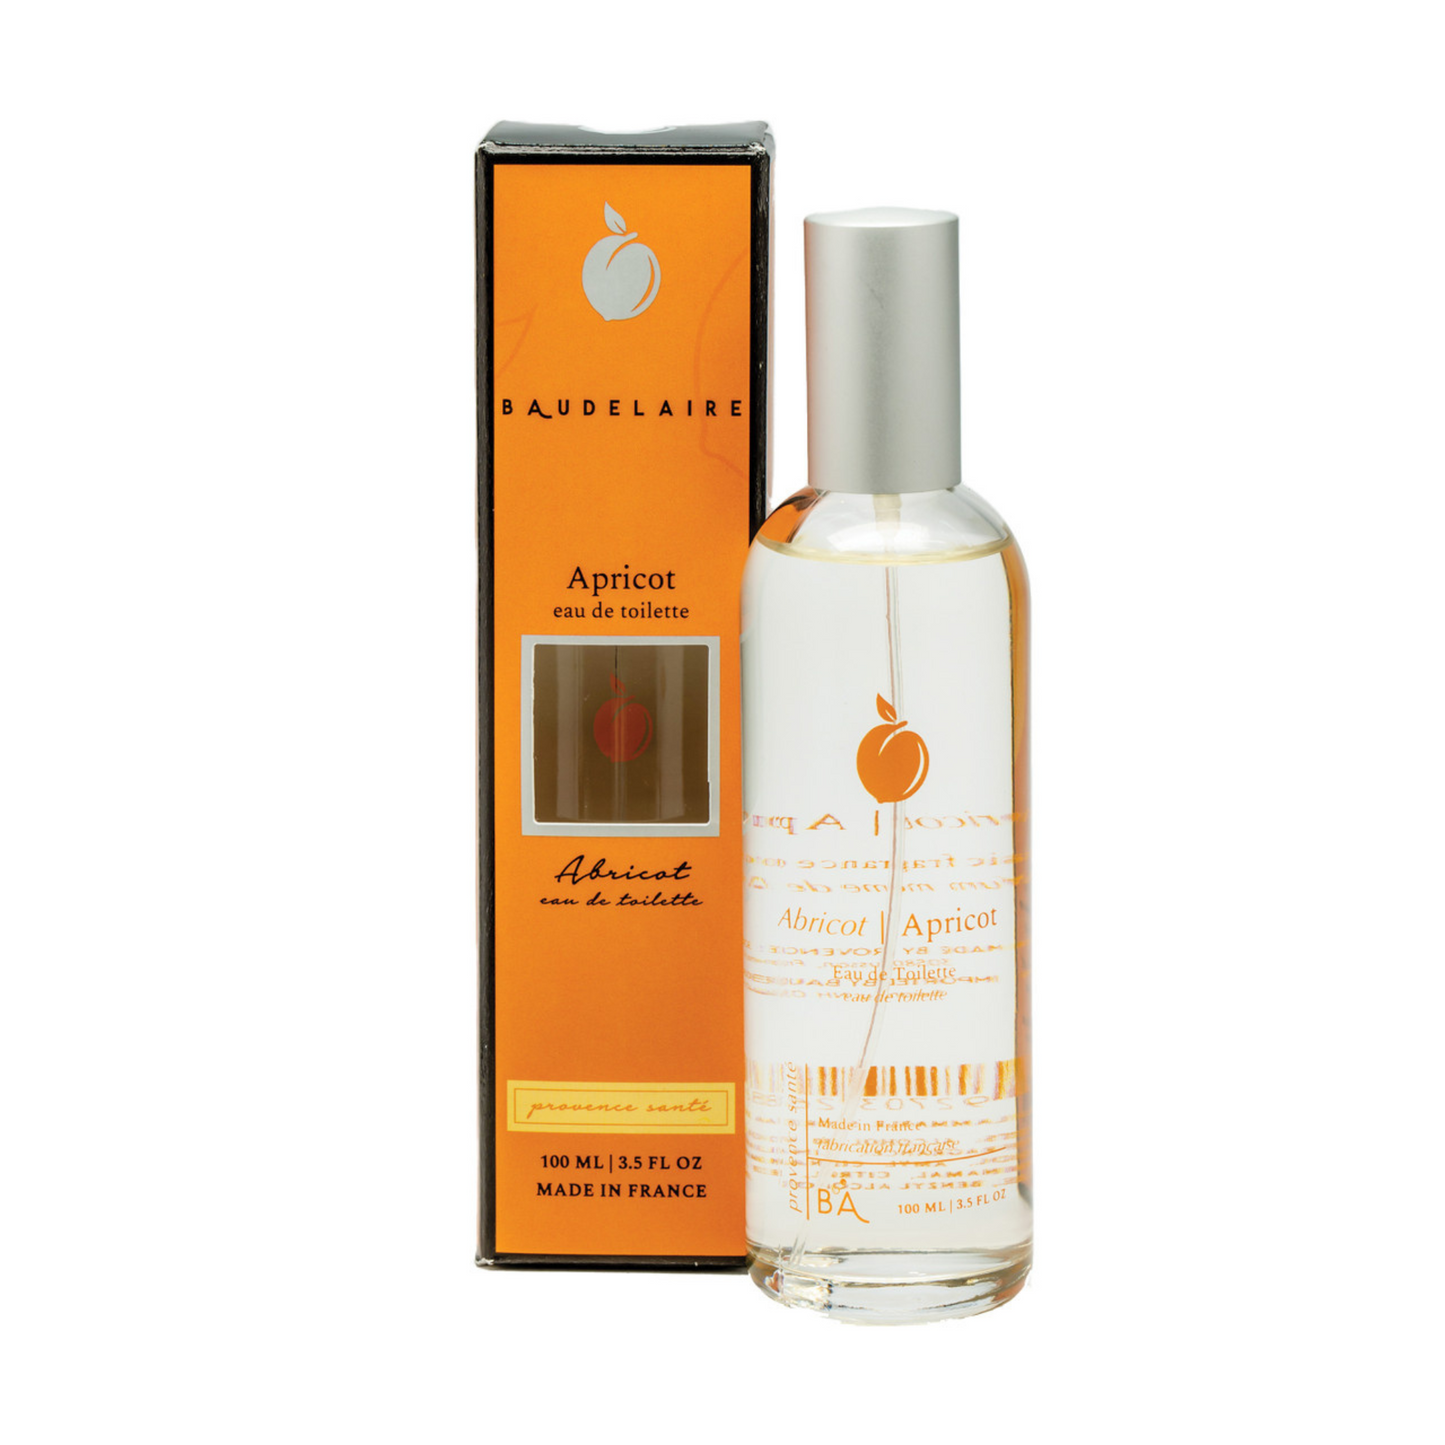 Primary Image of Provence Sante Apricot EDT (3.5 oz) 